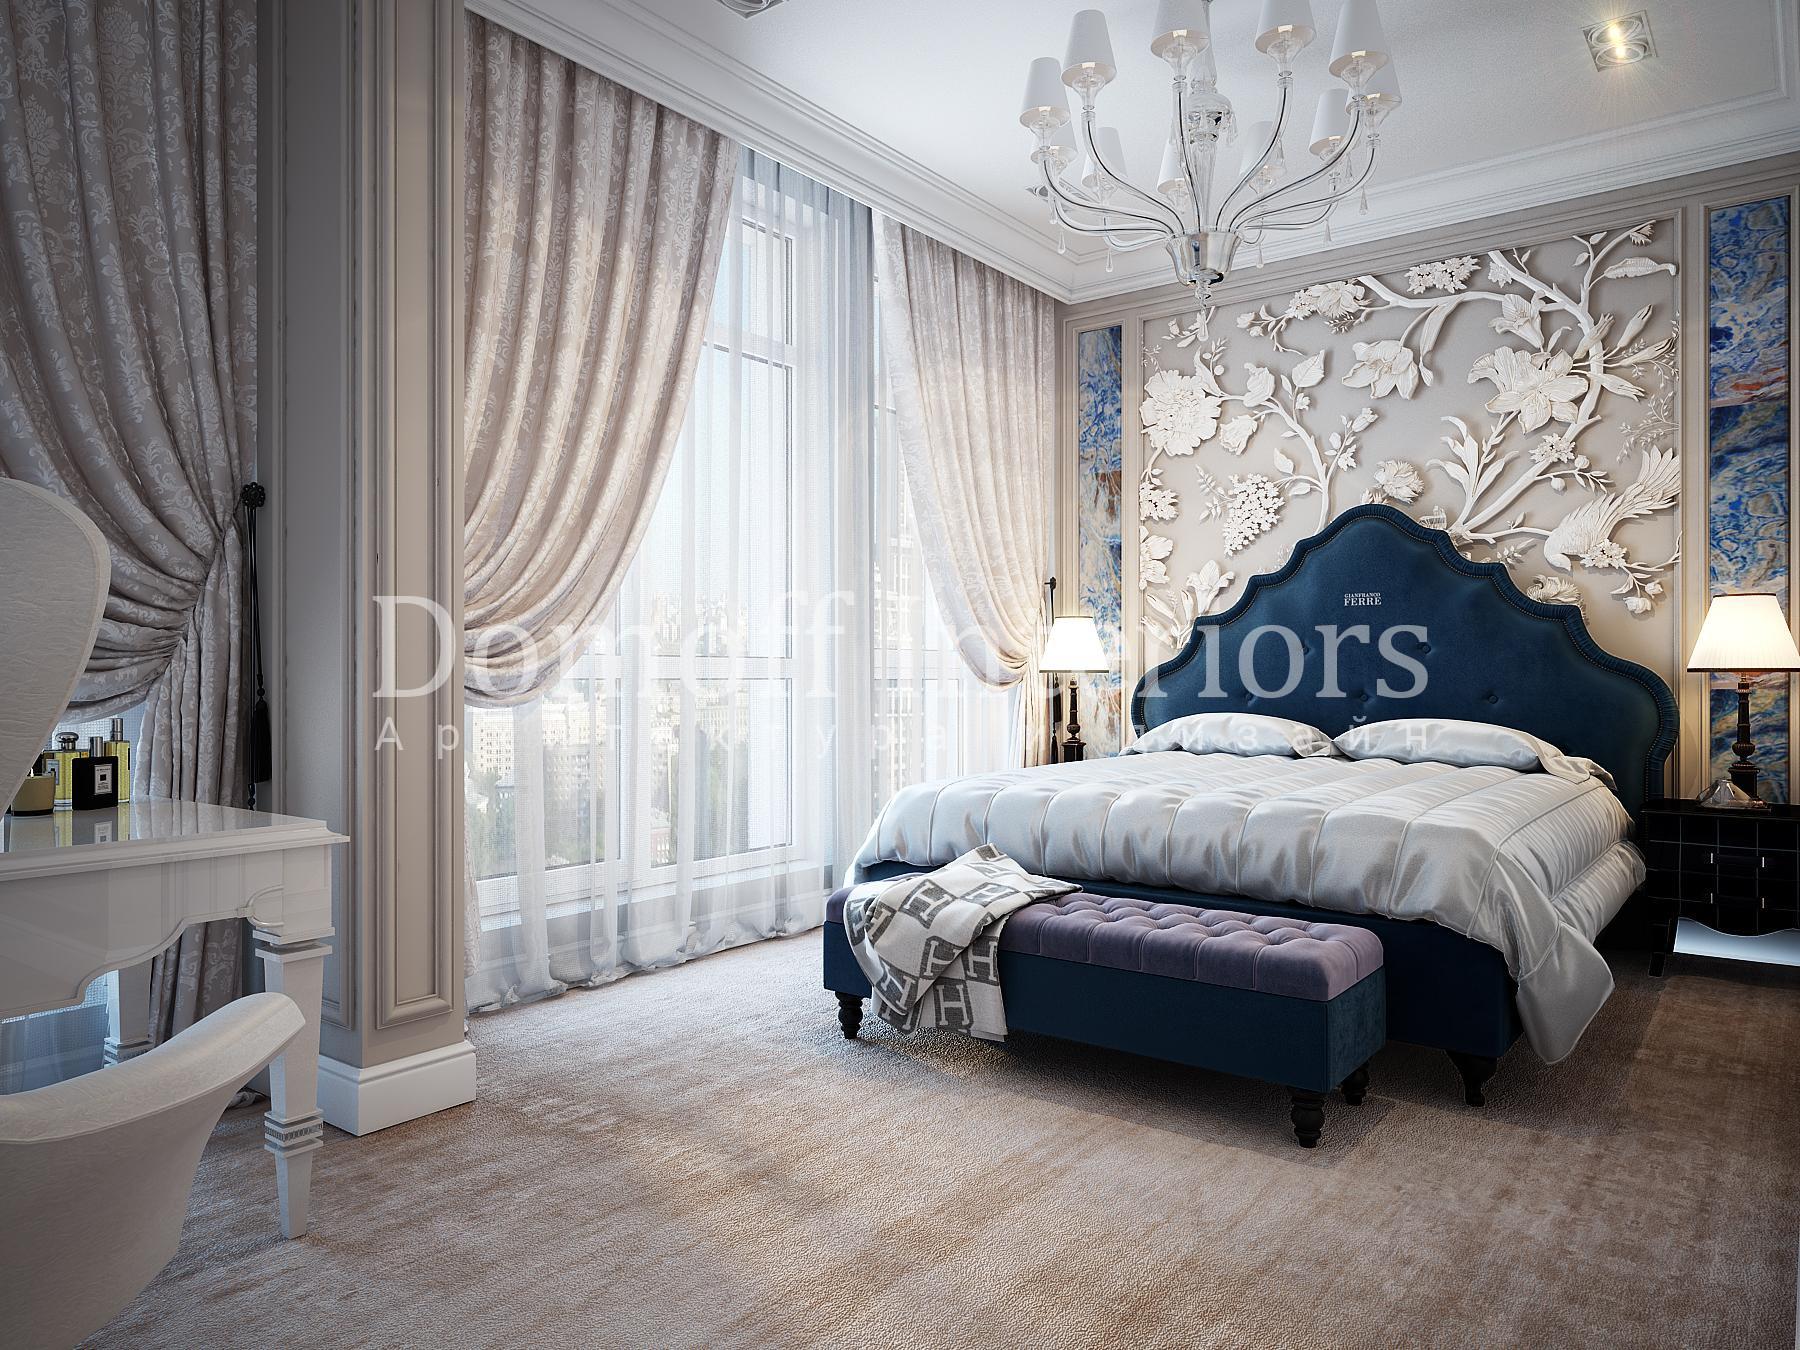 Bedroom No. 1 made in the style of Contemporary classics